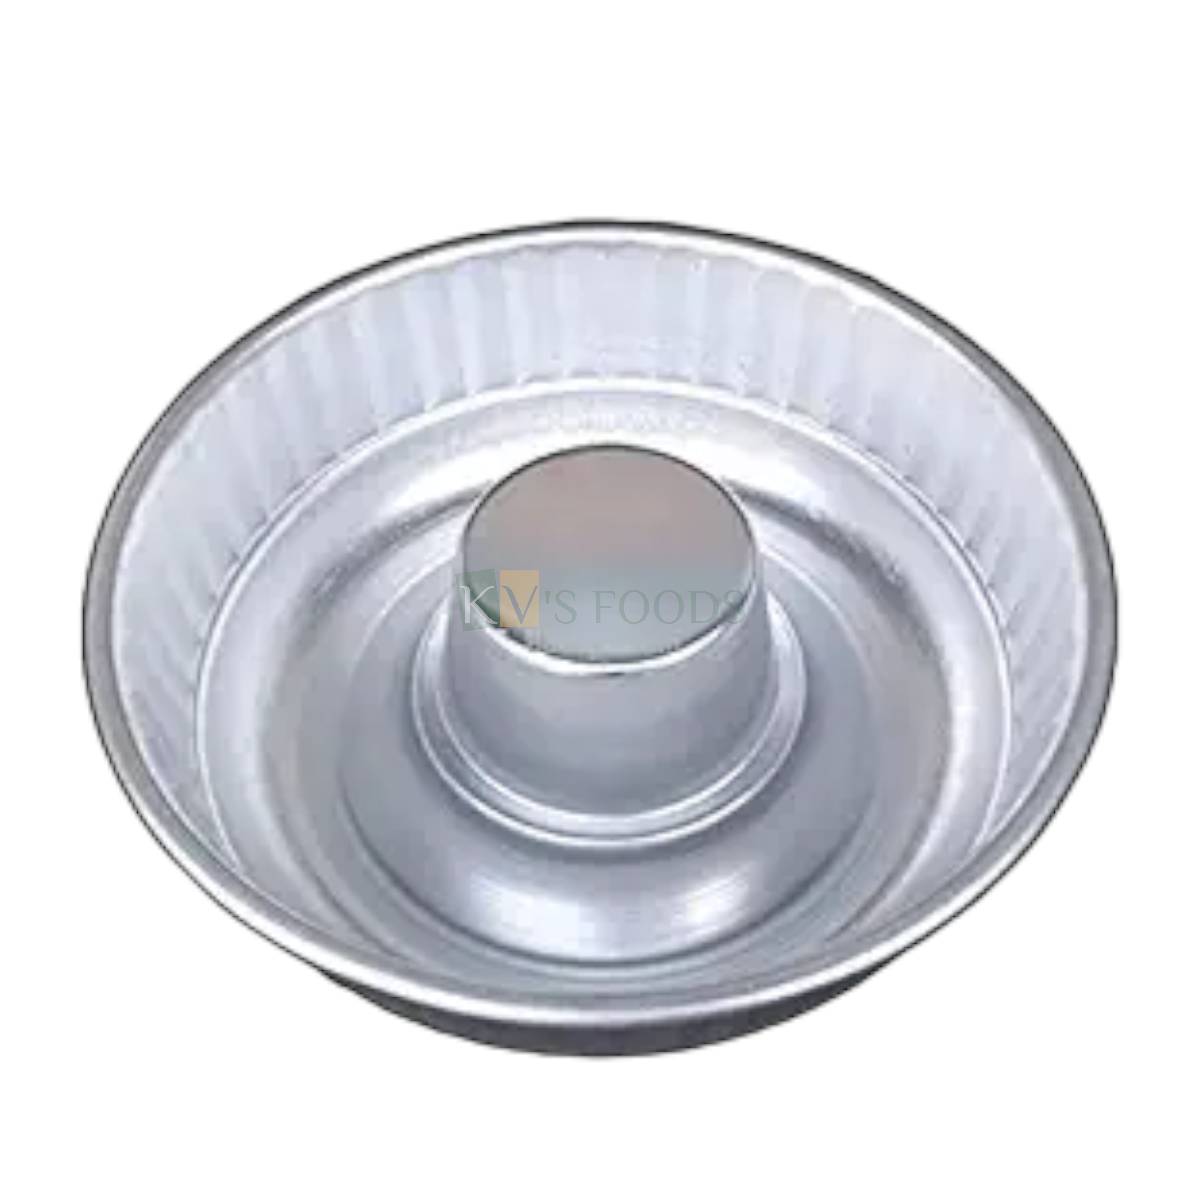 1PC Baking Aluminium Round Big Doughnut Ring Cake Mould Panettone Cake Bakeware Pan Mould 1 Kg Size 8.5x2.5 Inch for Volcano, Bundt, Mousse Pudding Cheese Chocolate Cakes Mould Tins Tray for Oven